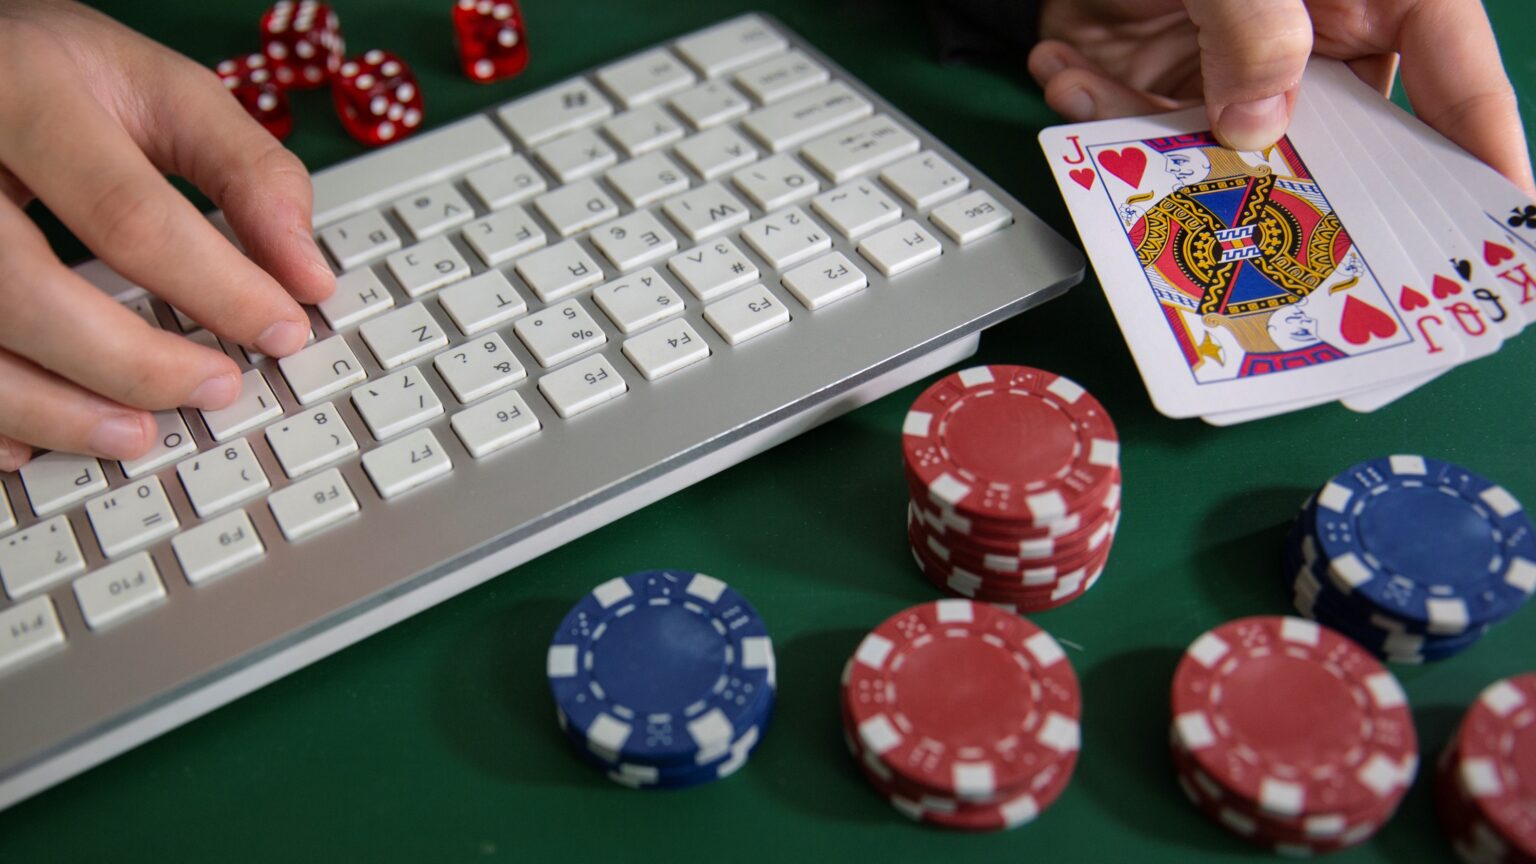 Online gambling is more popular than ever, and you can make good money doing it. Get the best bankroll management tips to improve your odds.